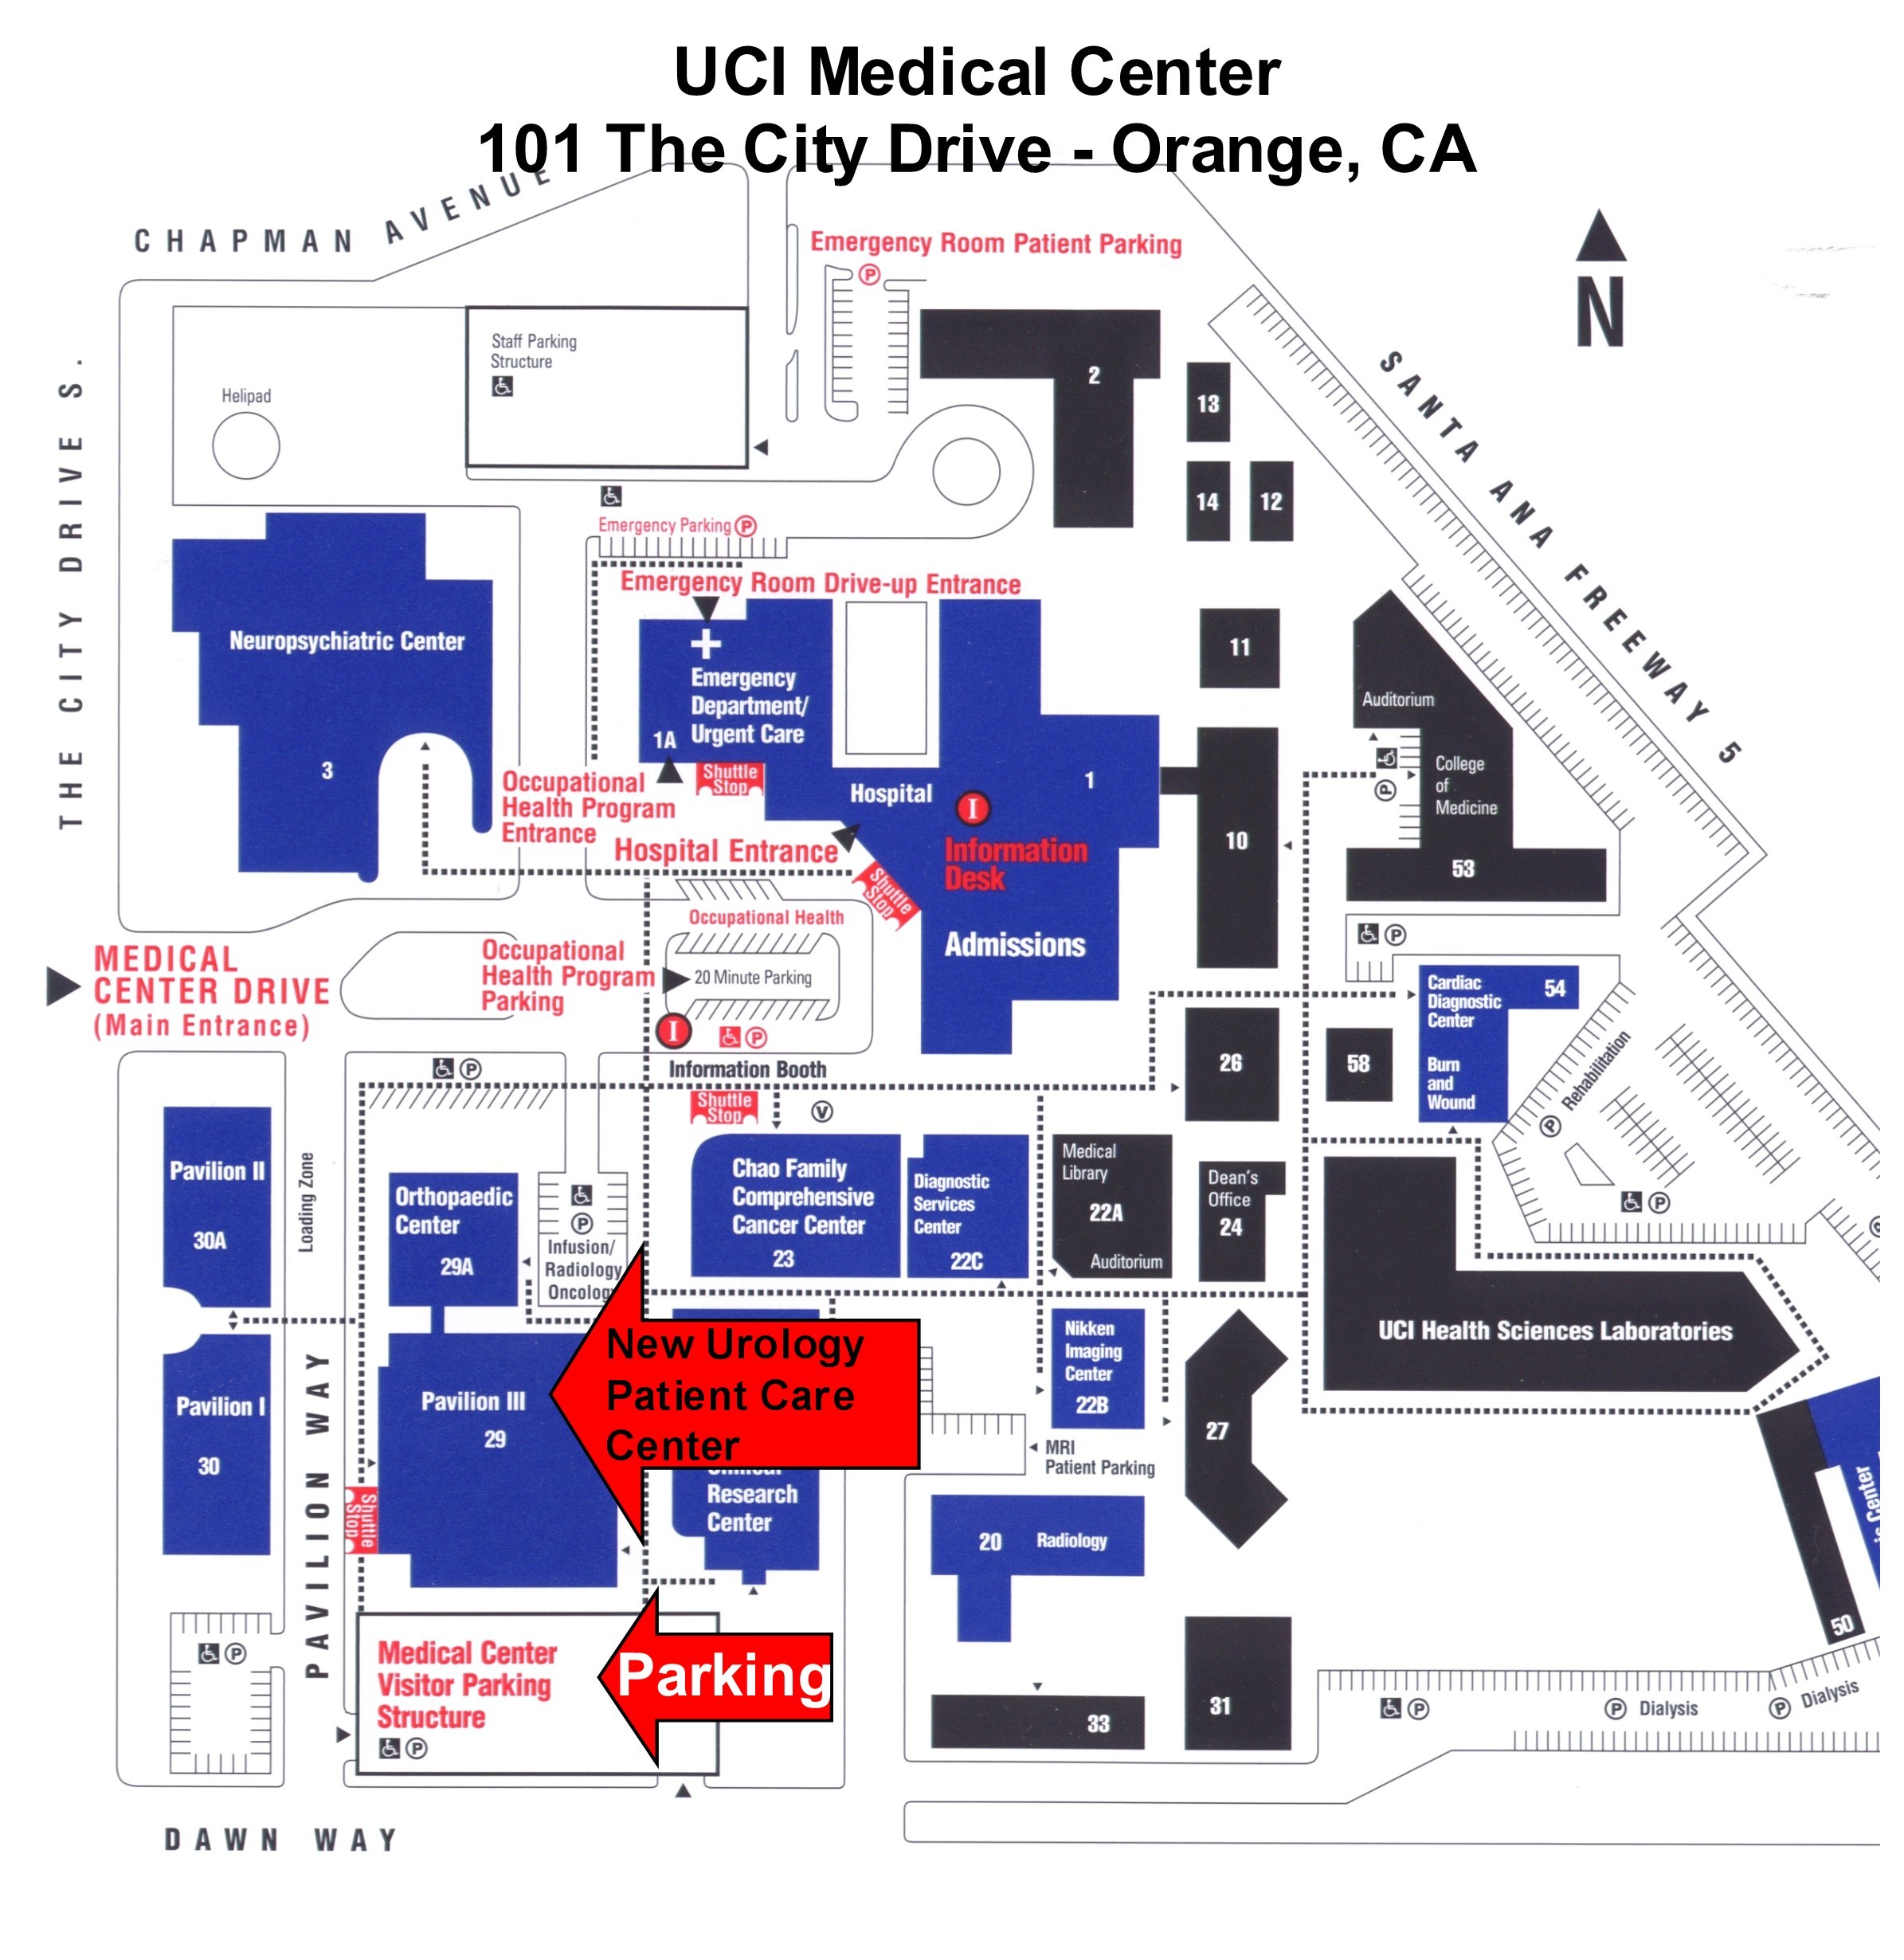  UCI Medical Center is centrally located in Orange County